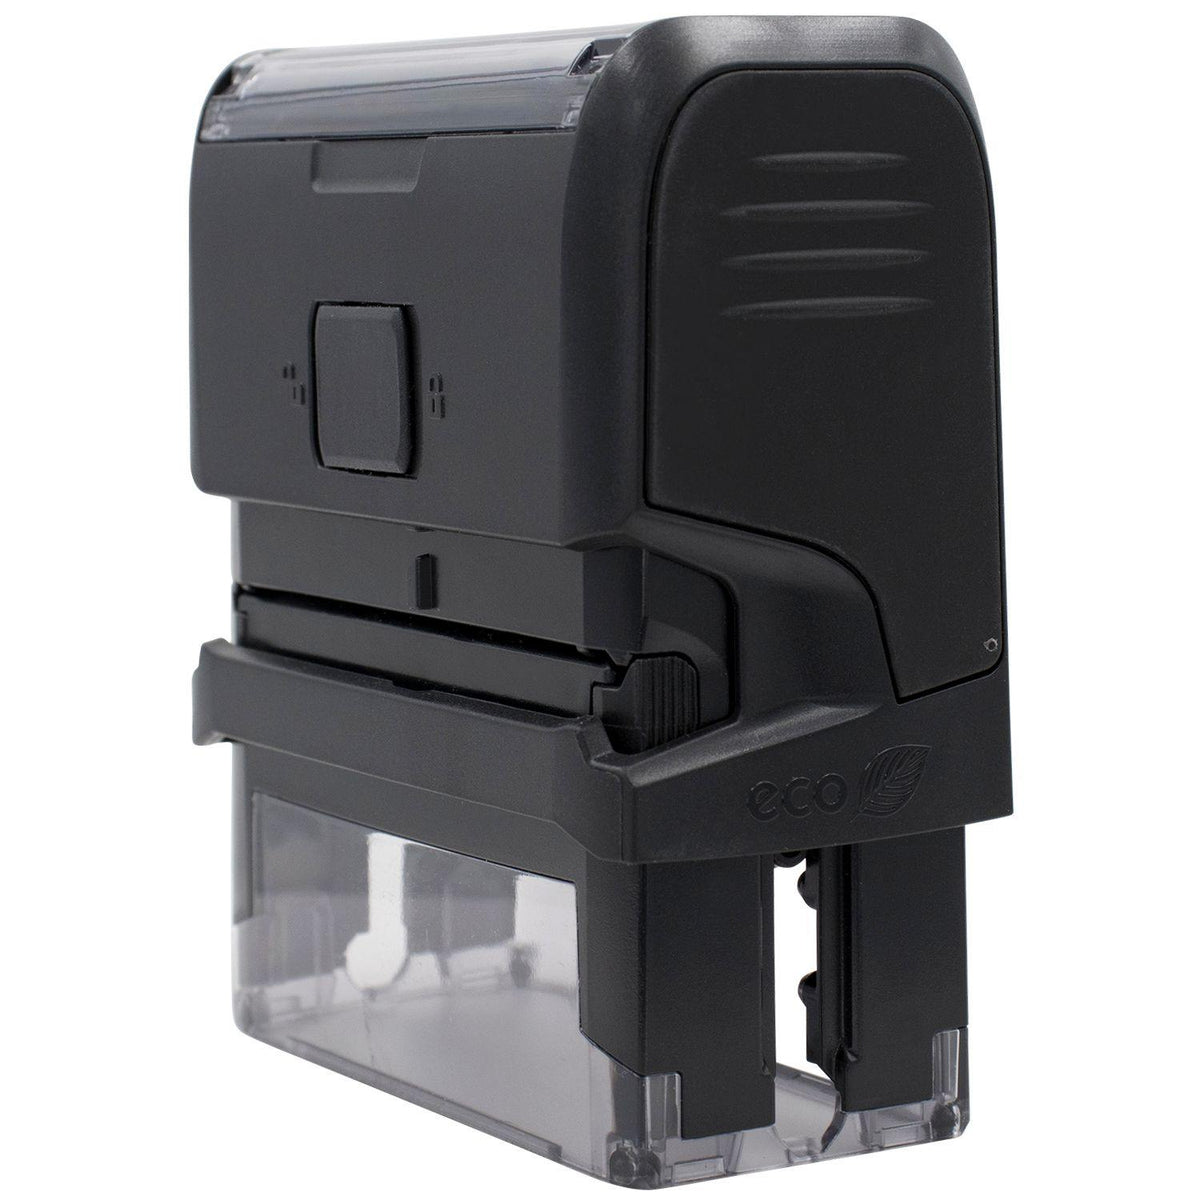 Self-Inking This work Teacher Assisted Stamp - Engineer Seal Stamps - Brand_Trodat, Impression Size_Small, Stamp Type_Self-Inking Stamp, Type of Use_Teacher